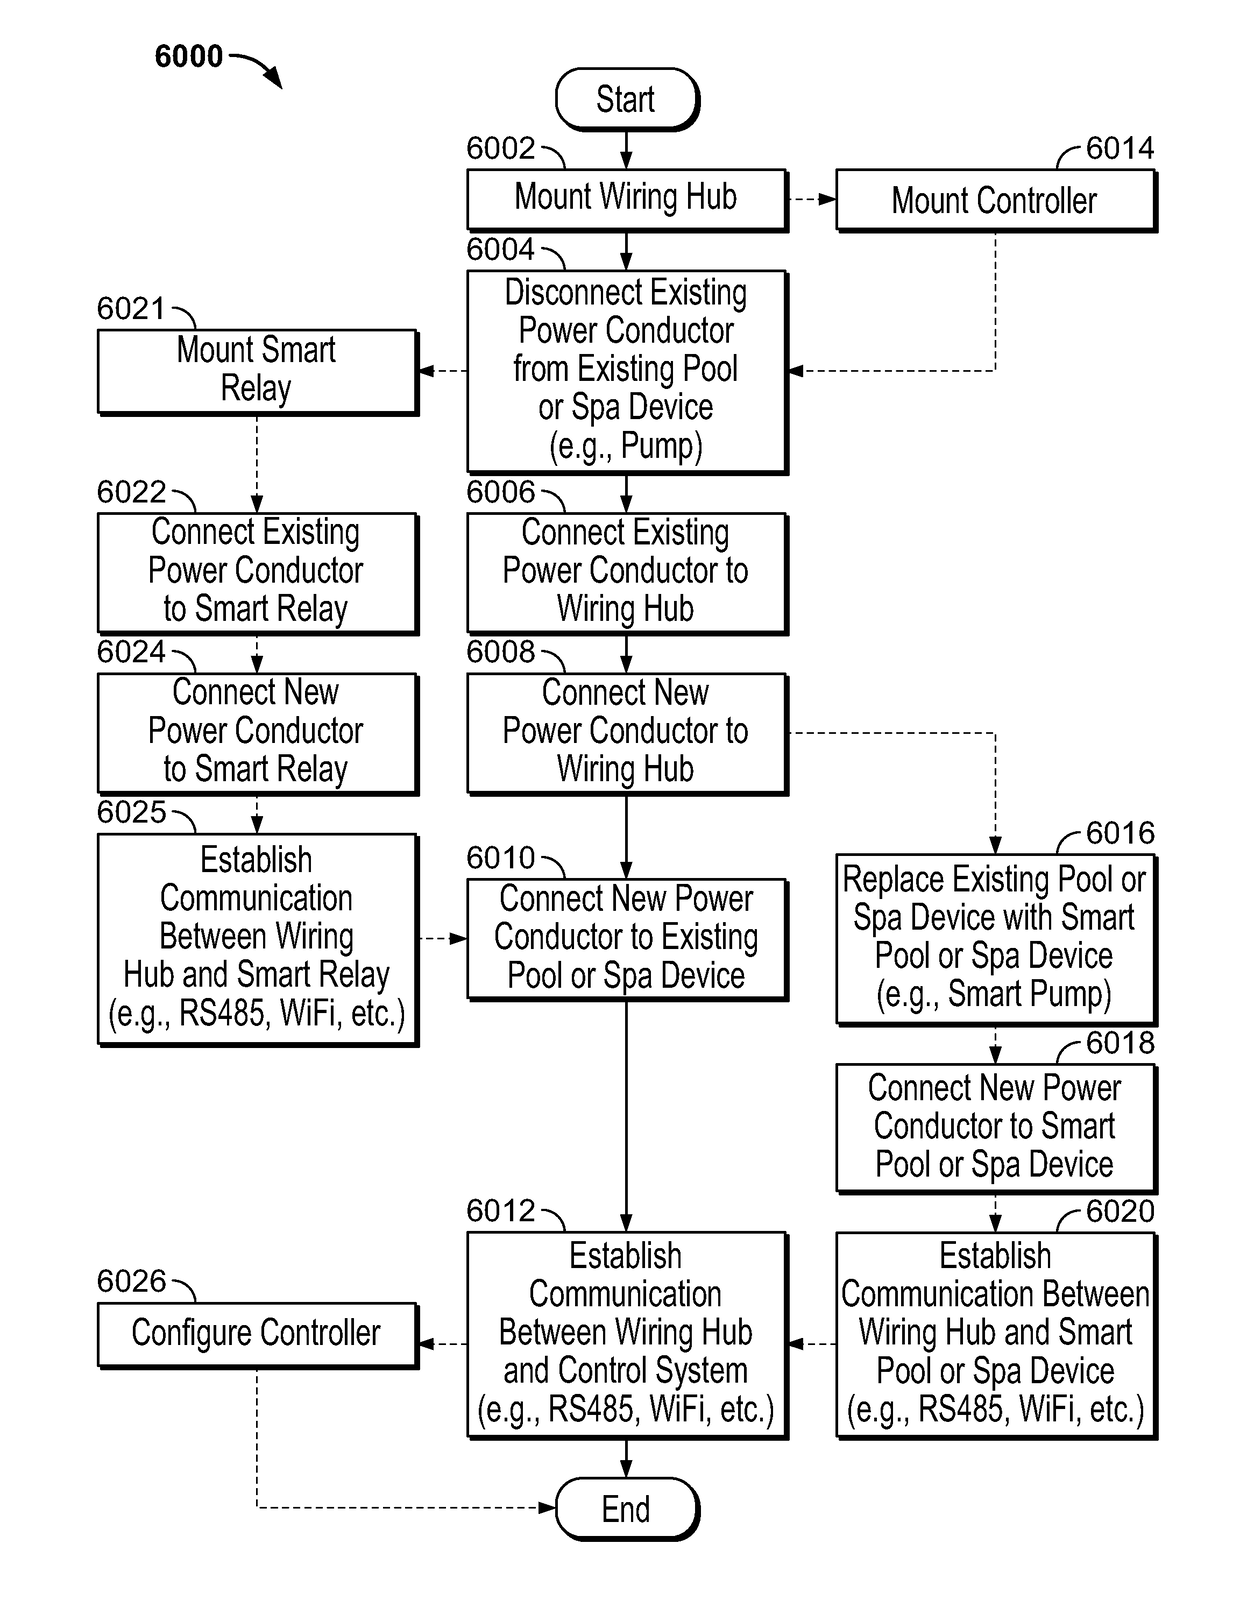 Systems and methods for providing network connectivity and remote monitoring, optimization, and control of pool/spa equipment